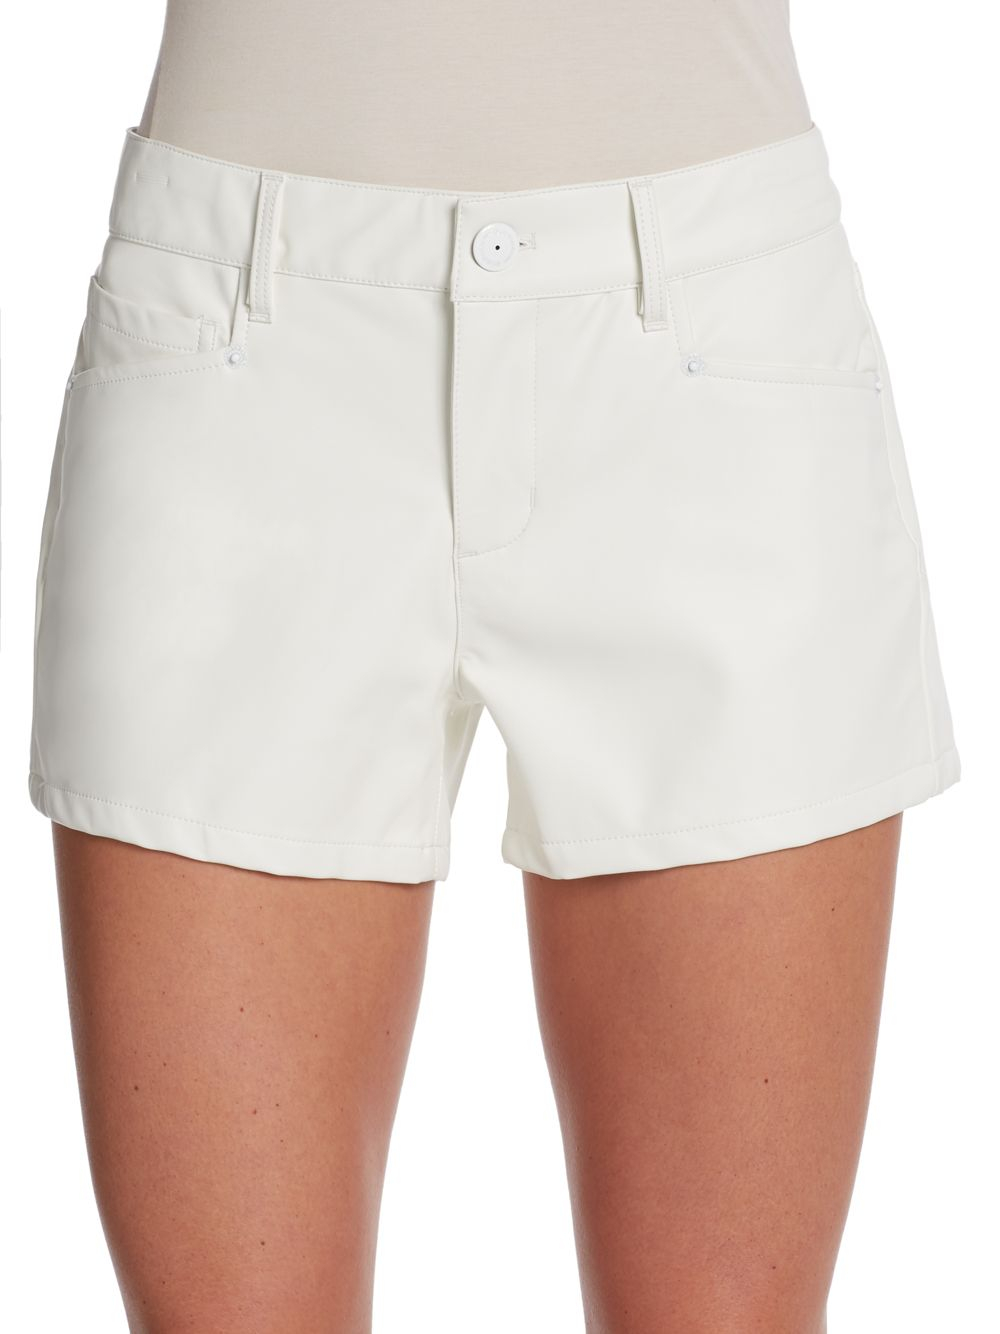 Bcbgeneration Faux Leather Shorts in White | Lyst